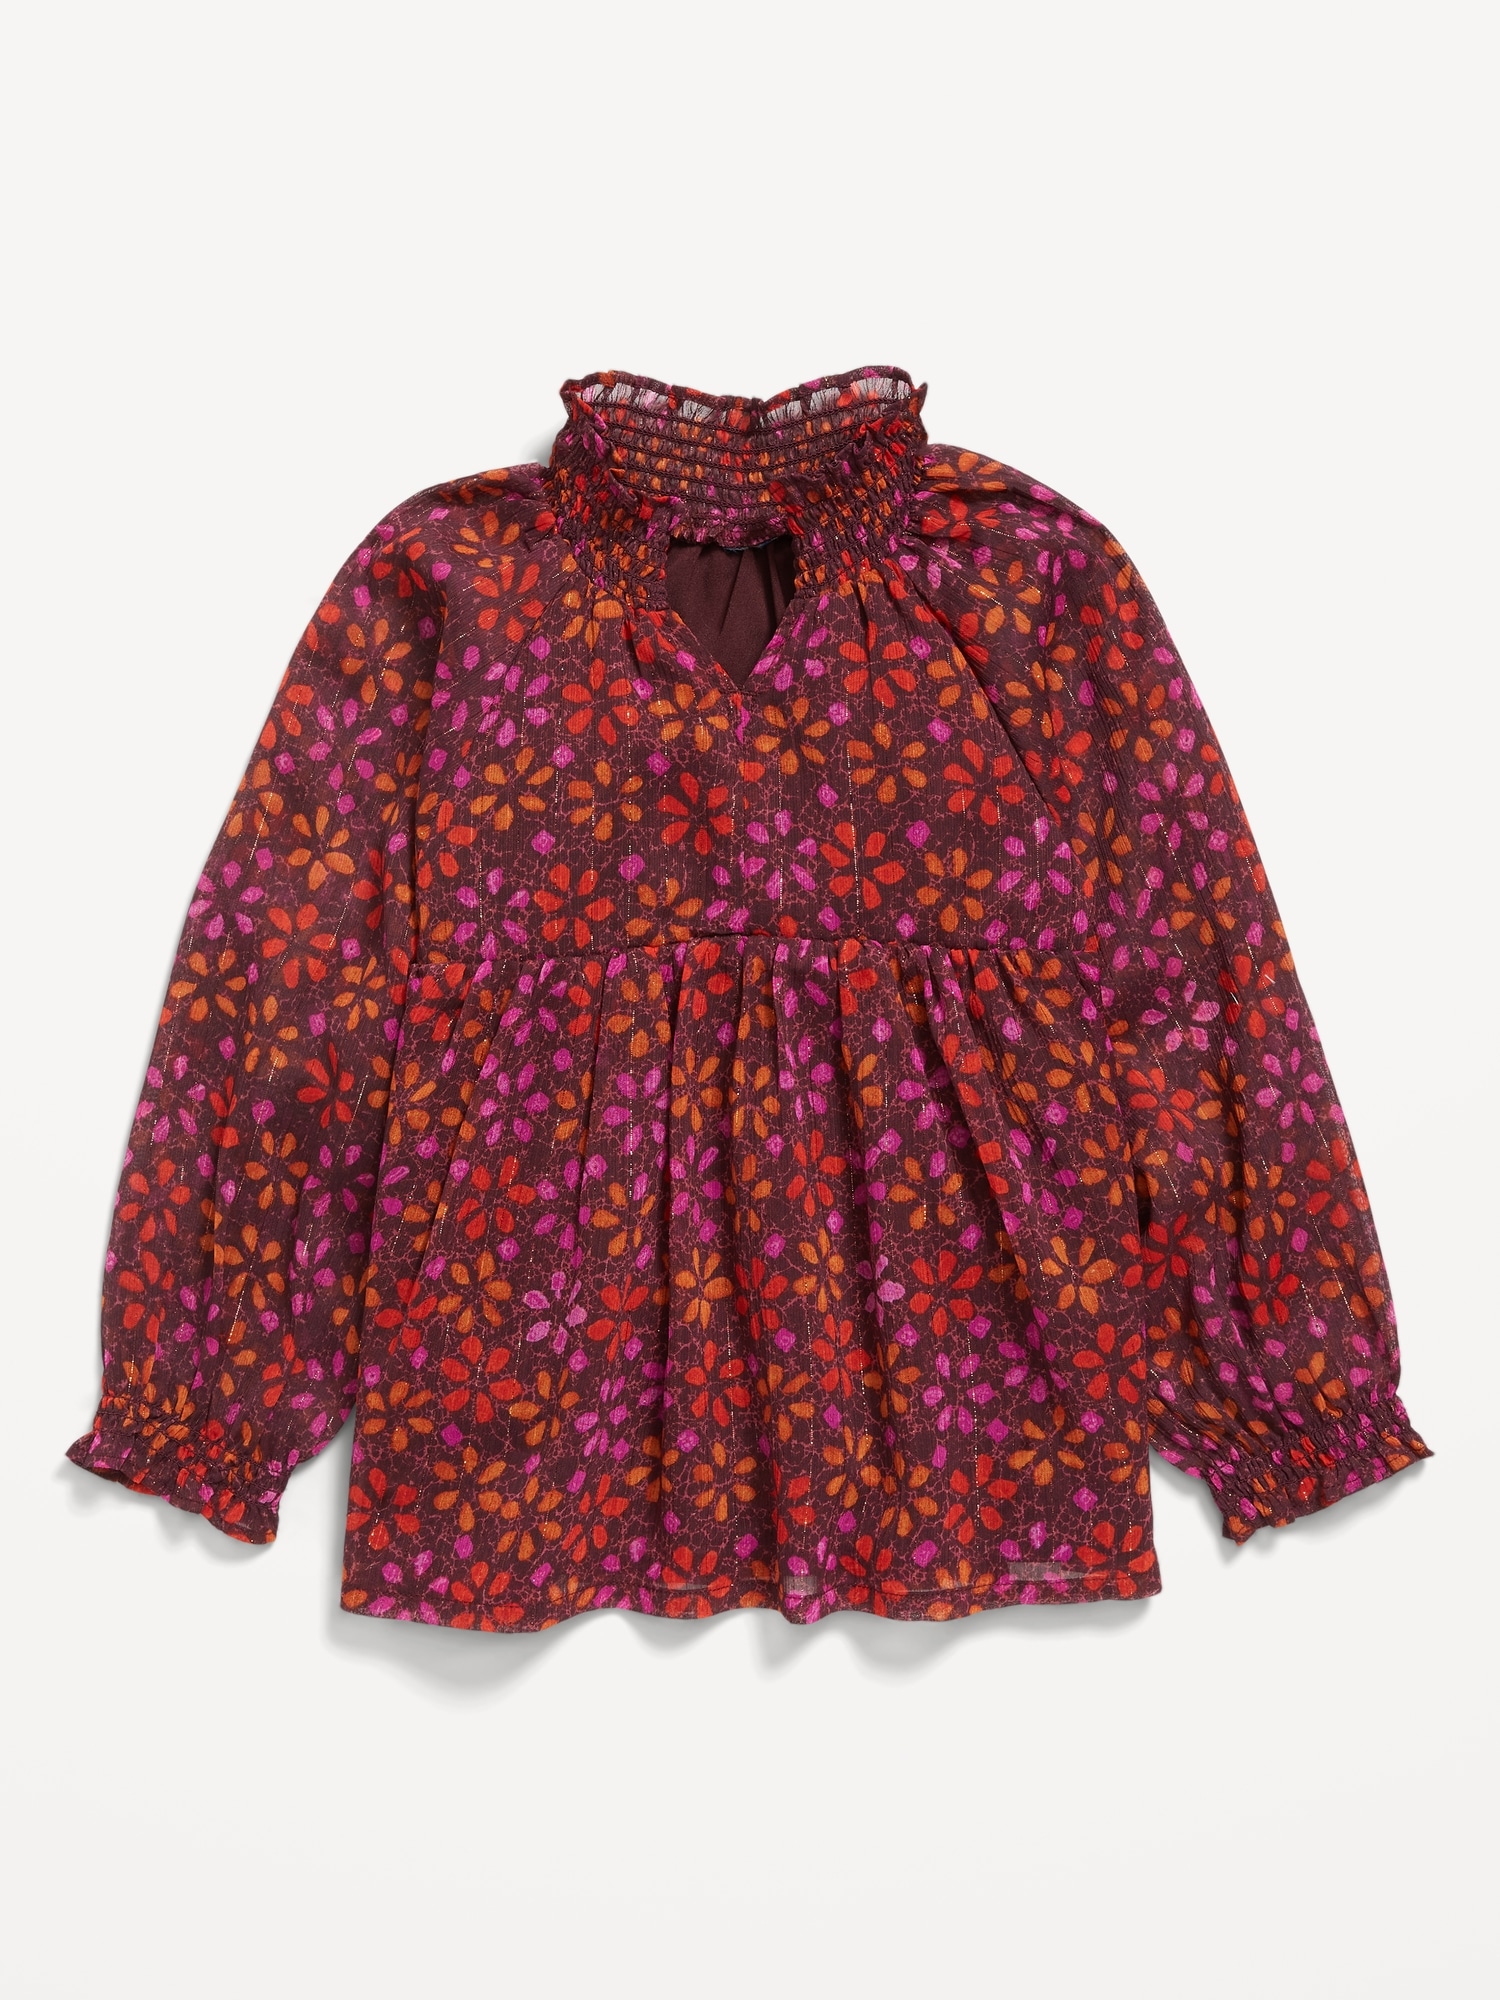 Long-Sleeve Printed Chiffon Swing Top for Toddler Girls | Old Navy